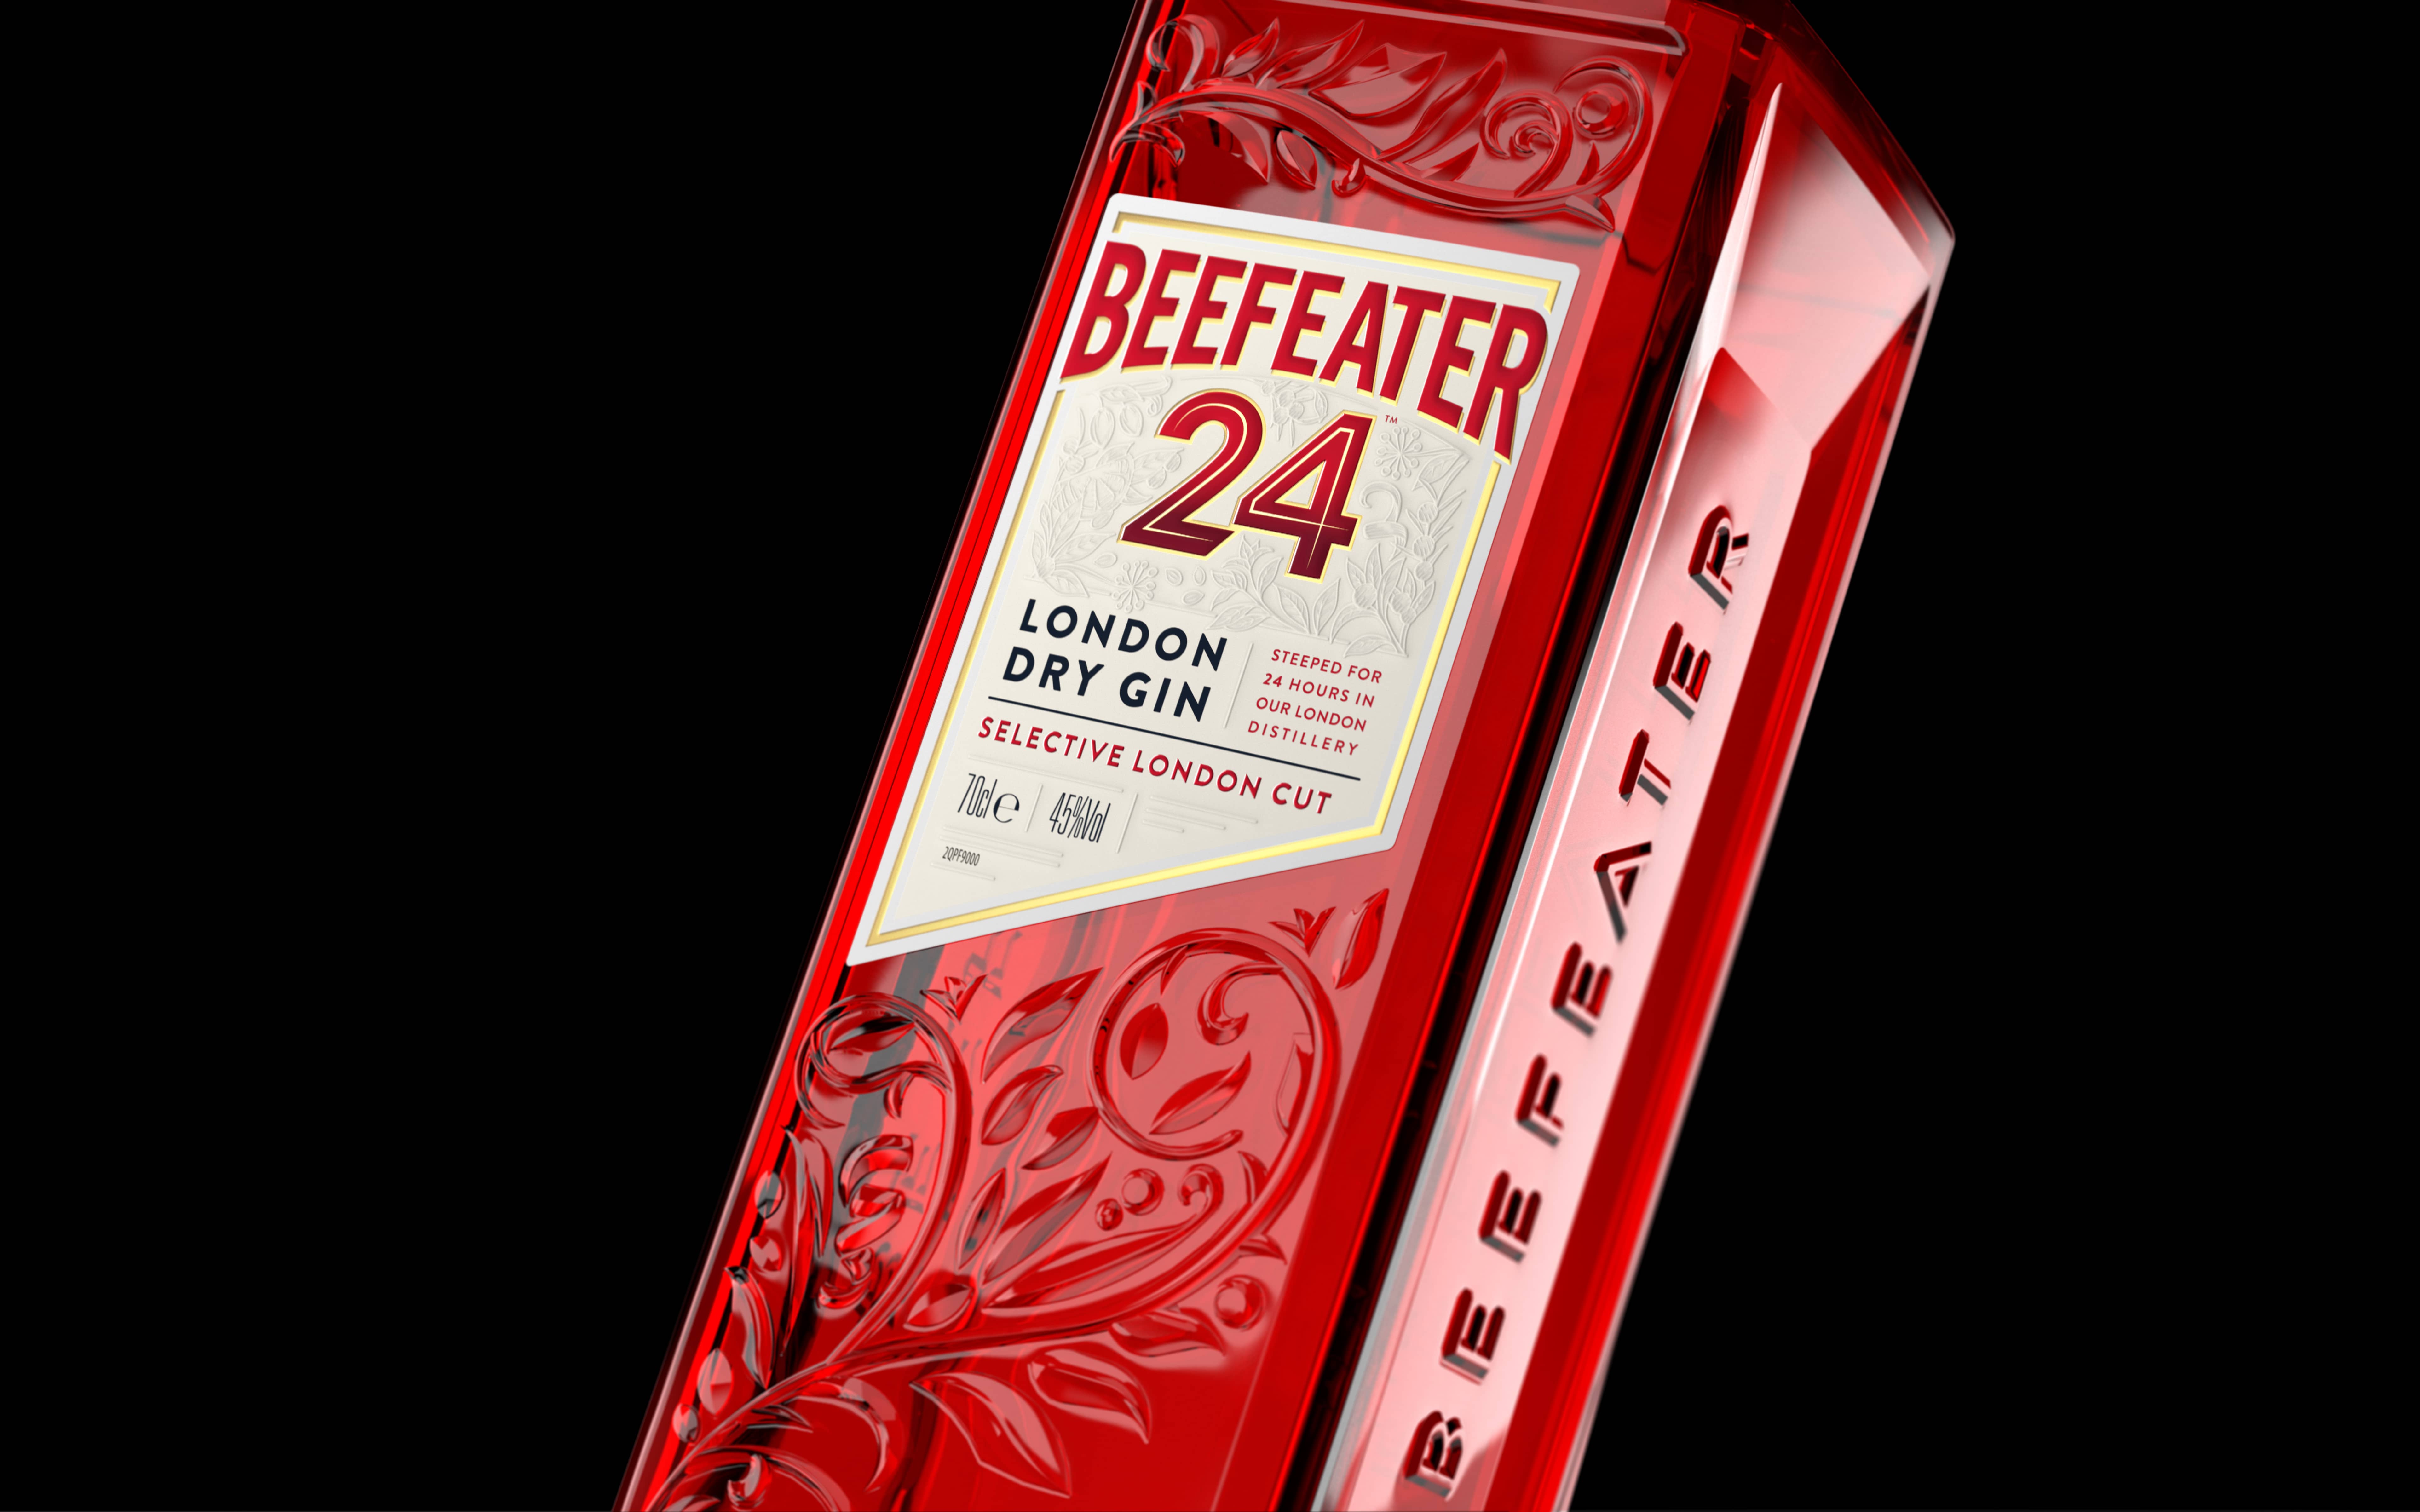 New Year, New More Elevated, Sustainable Beefeater 24 Bottle!